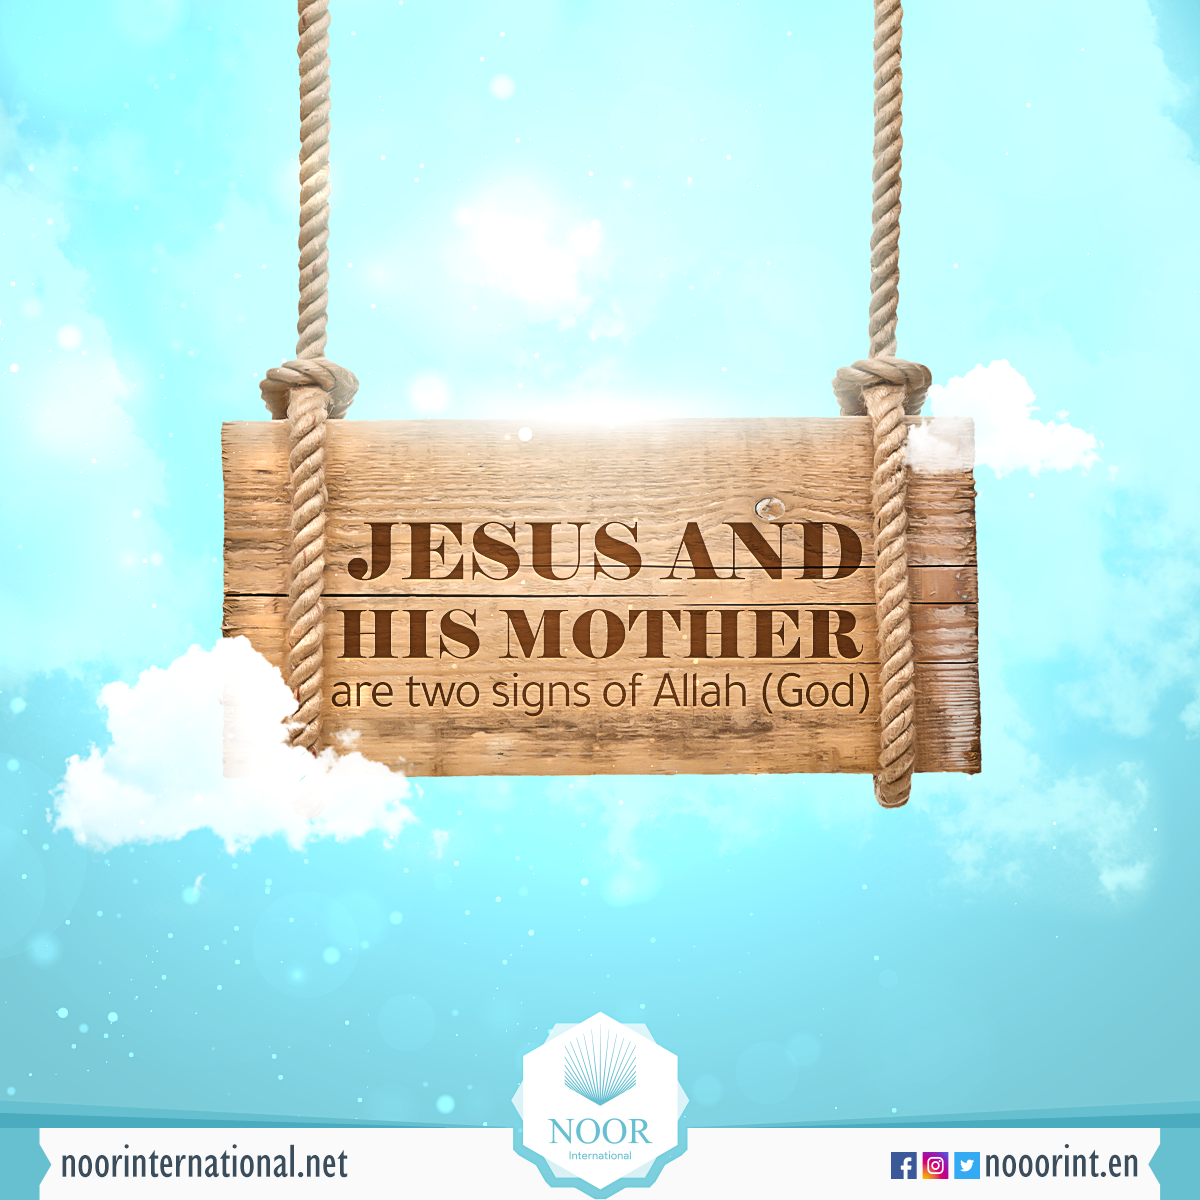 The Christ and His Mother are two signs of Allah